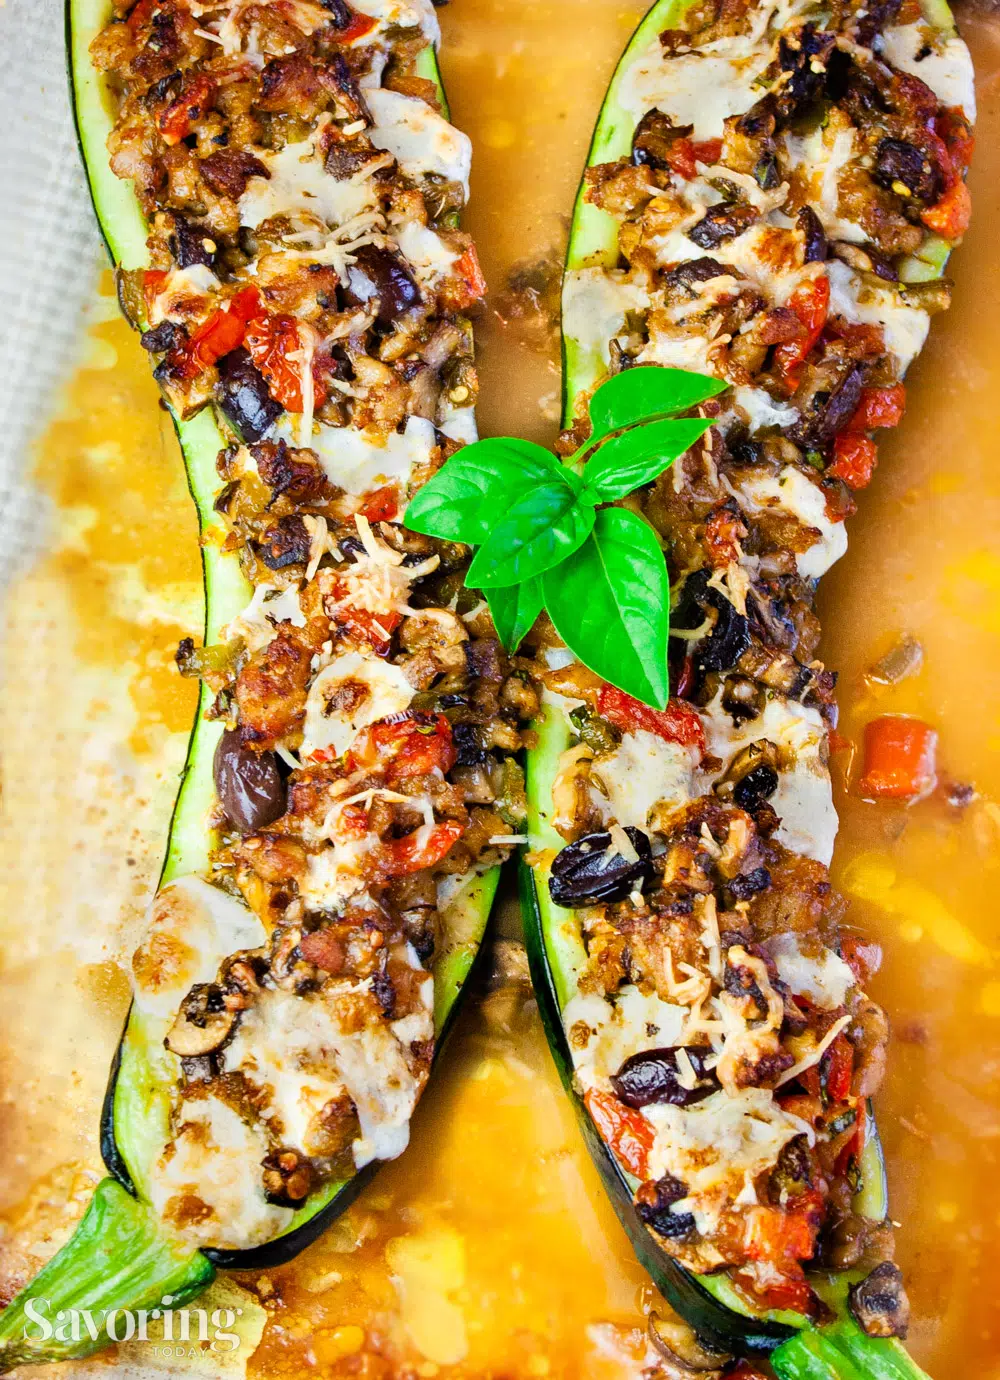 Zucchini stuffed with sausage, cheese, and olives with basil on top